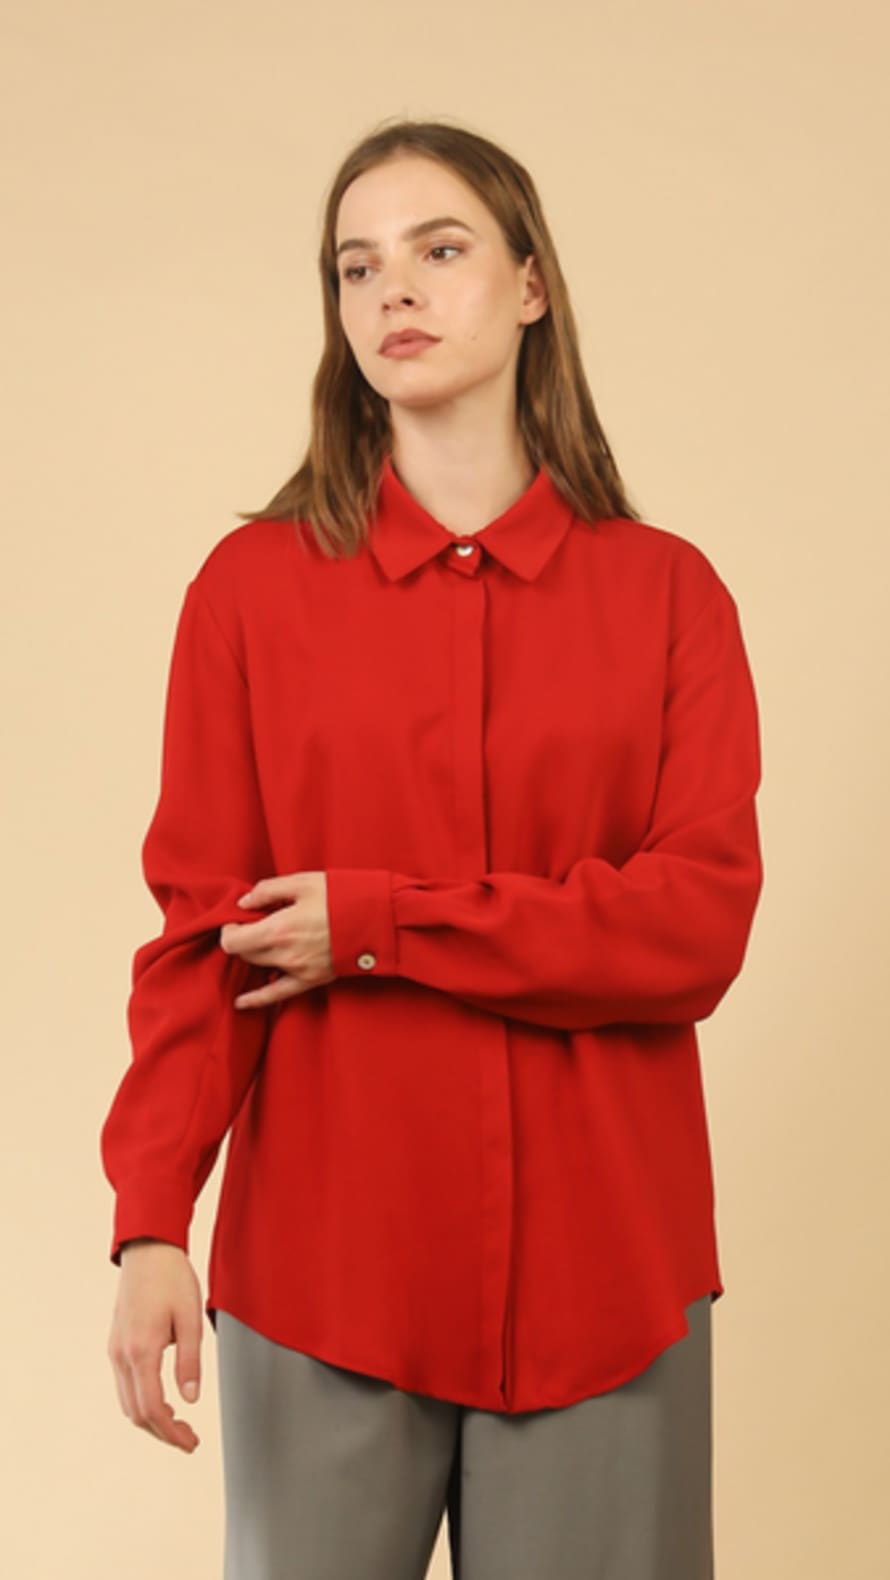 Lora Gene Tabby Essential Shirt In Cherry Red By